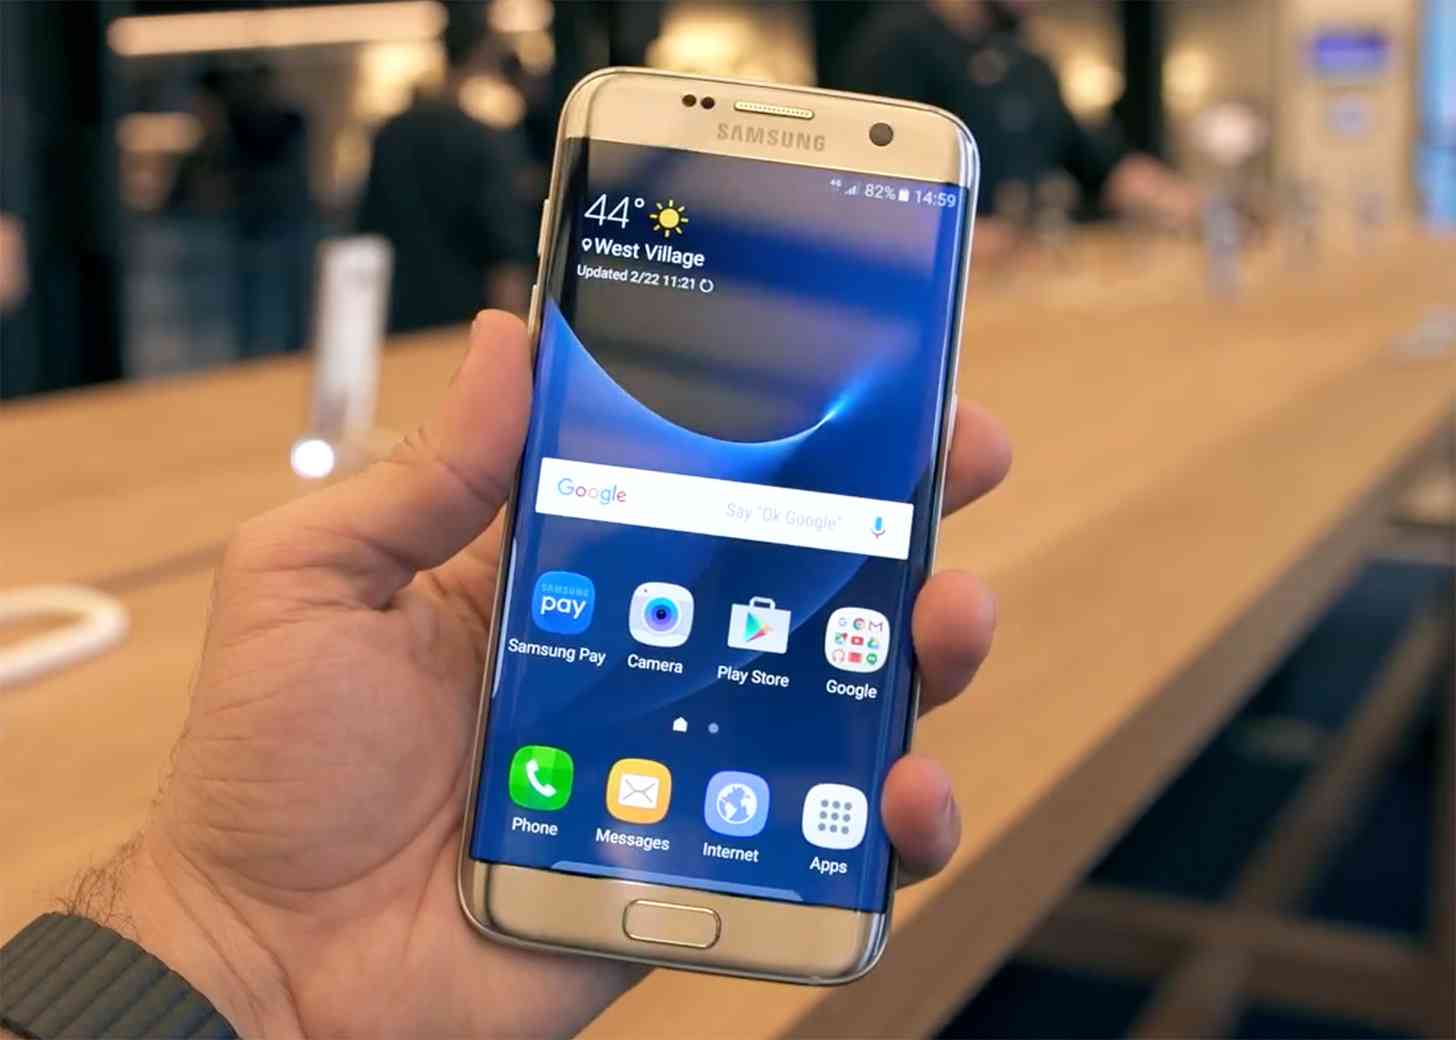 Samsung Galaxy S7 edge hands-on review